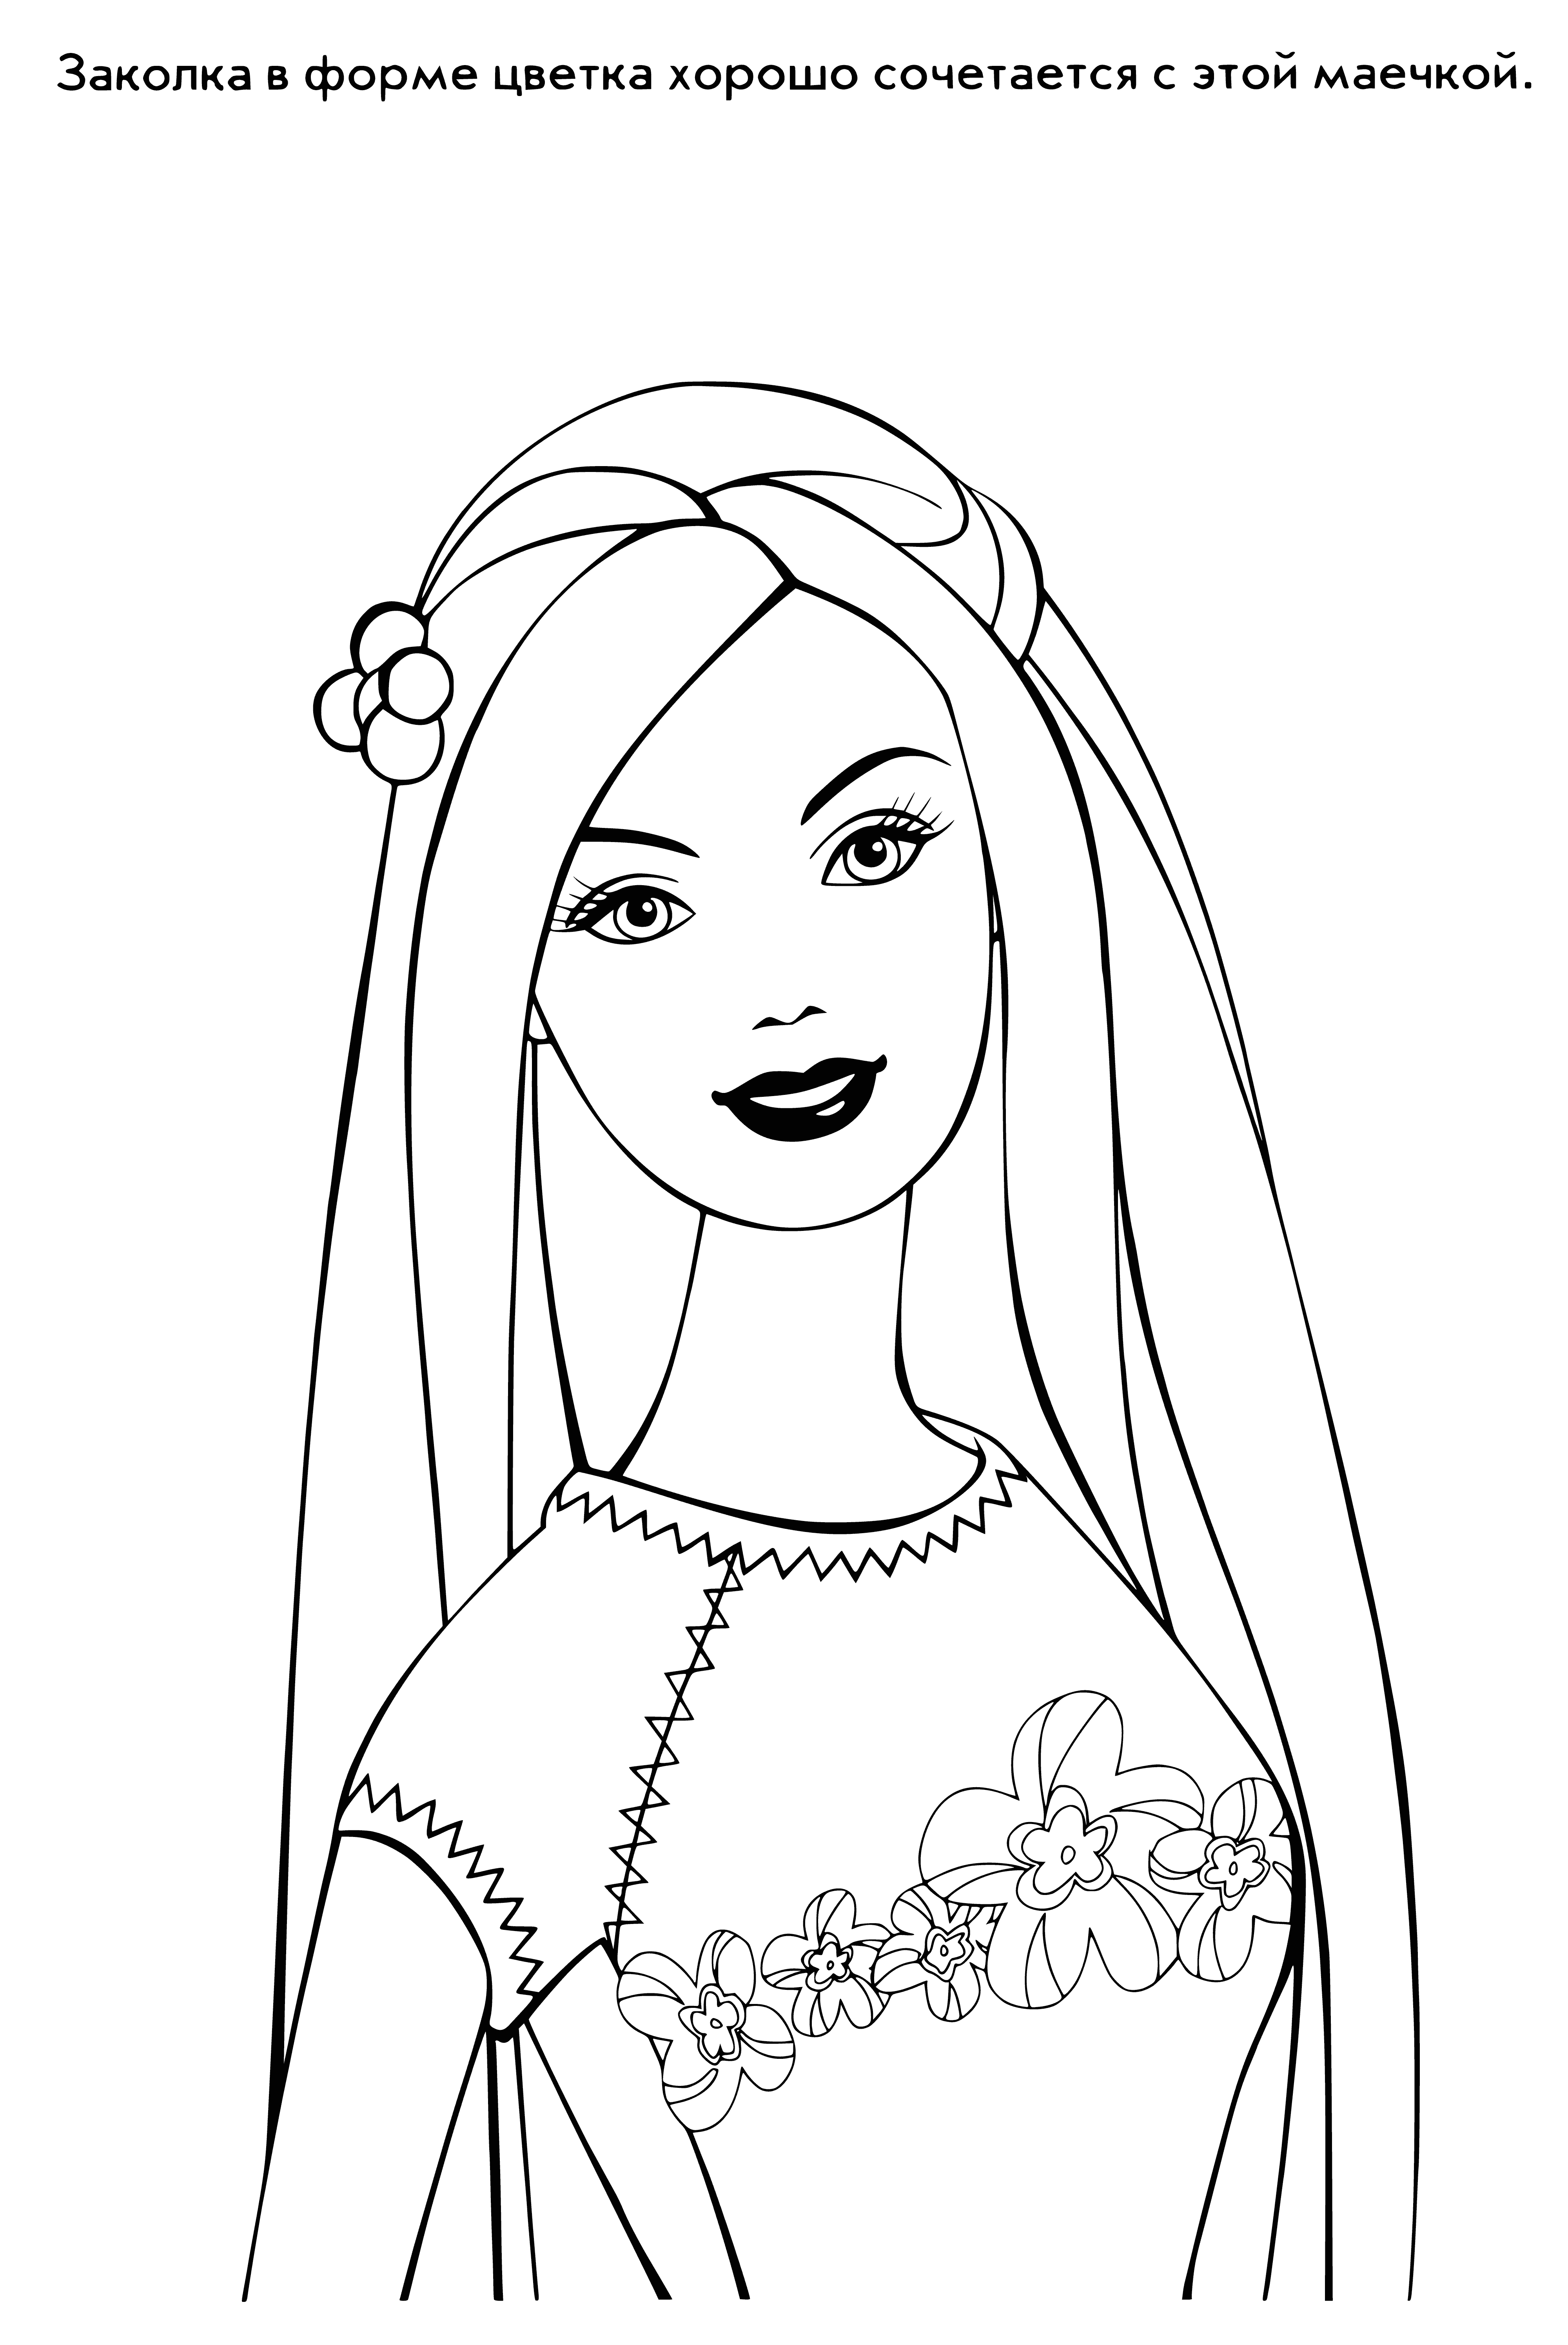 coloring page: The Barbie is a plastic doll with blonde hair and blue eyes wearing a pink shirt, blue skirt, and black shoes. #barbie